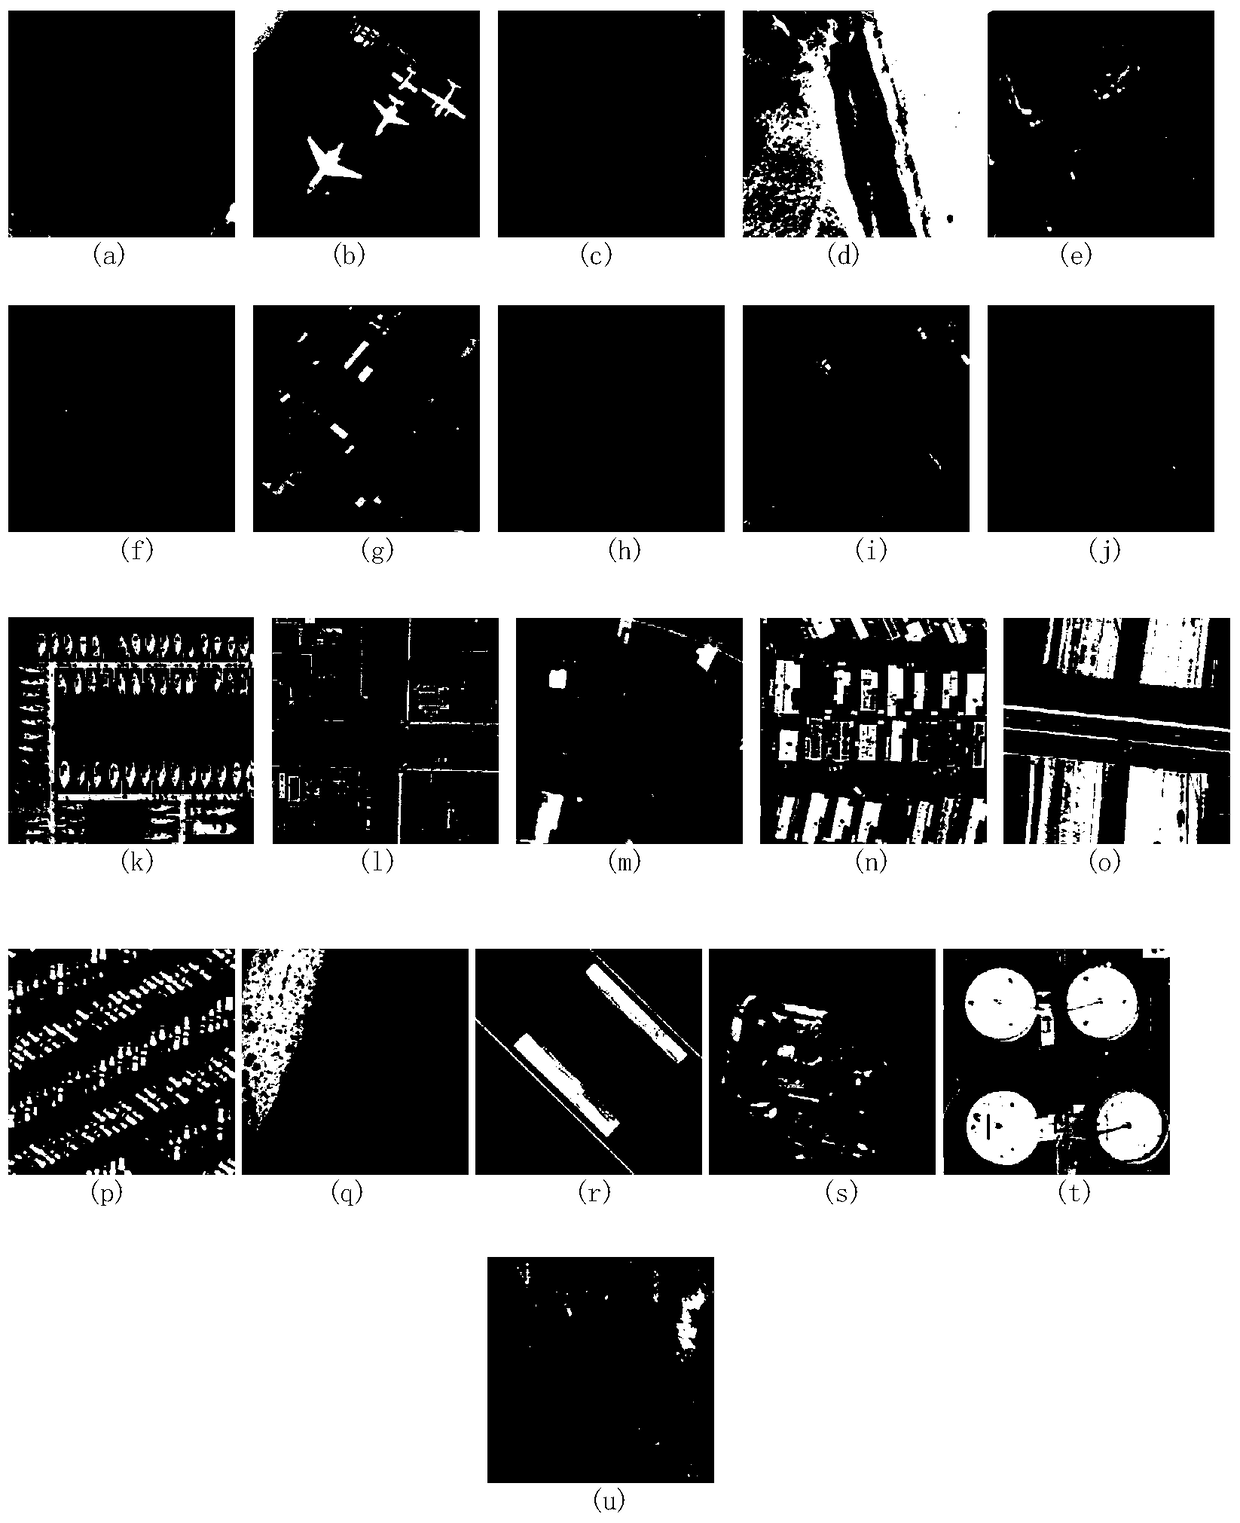 Remote Sensing Image Scene Classification Method Based on Multi-channel Hierarchical Orthogonal Matching